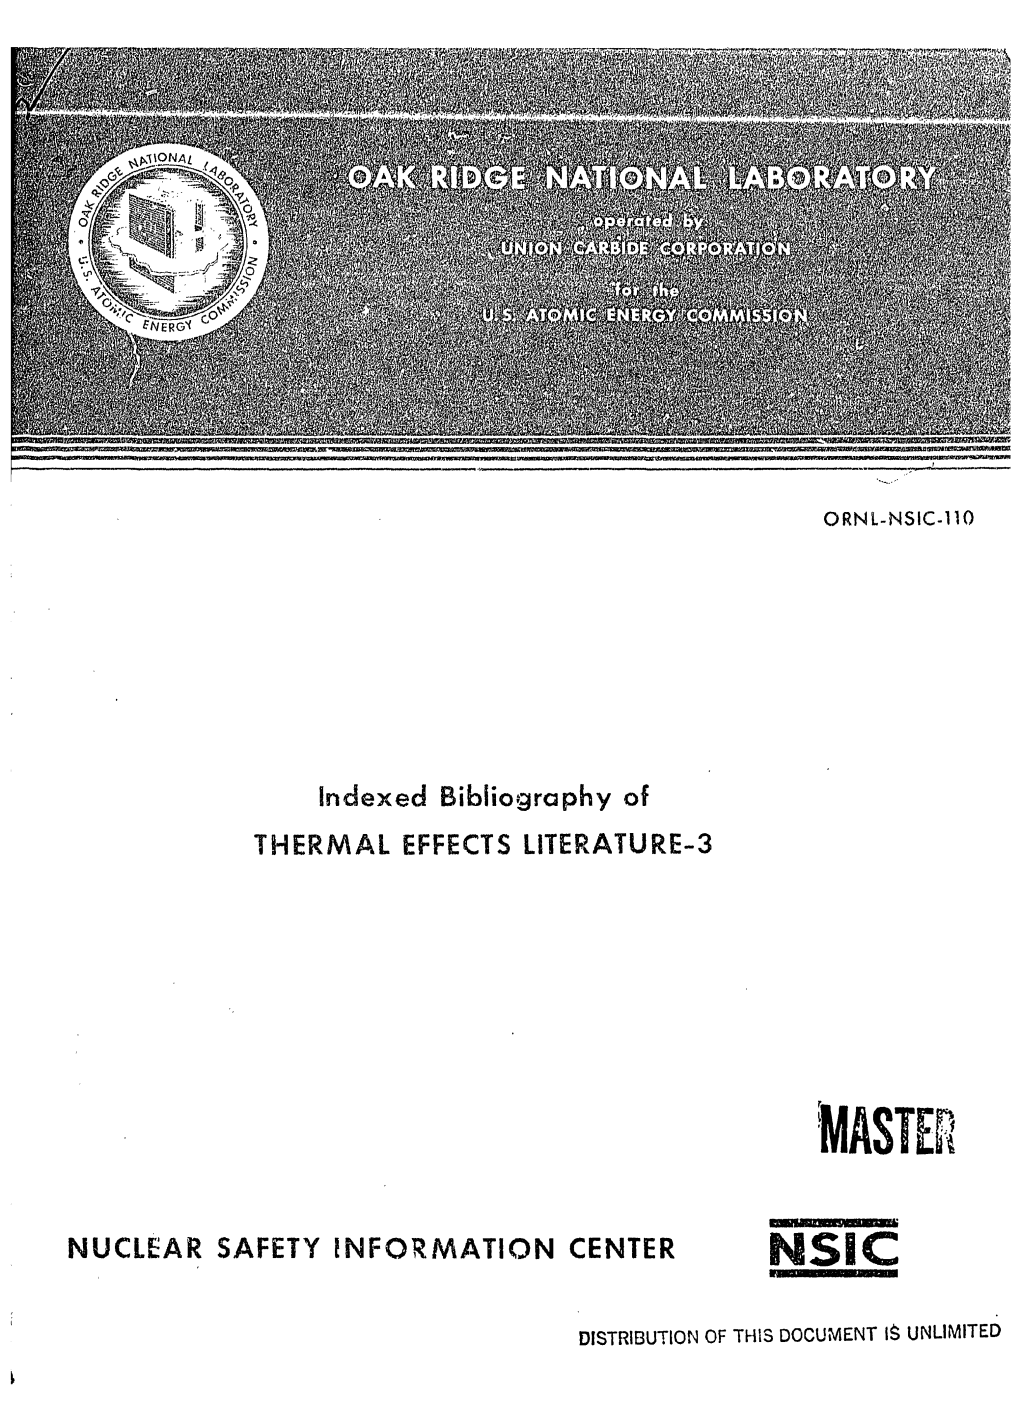 Indexed Bibliography of THERMAL EFFECTS LITERATURE-3 NUCLEAR SAFETY INFORMATION CENTER N S